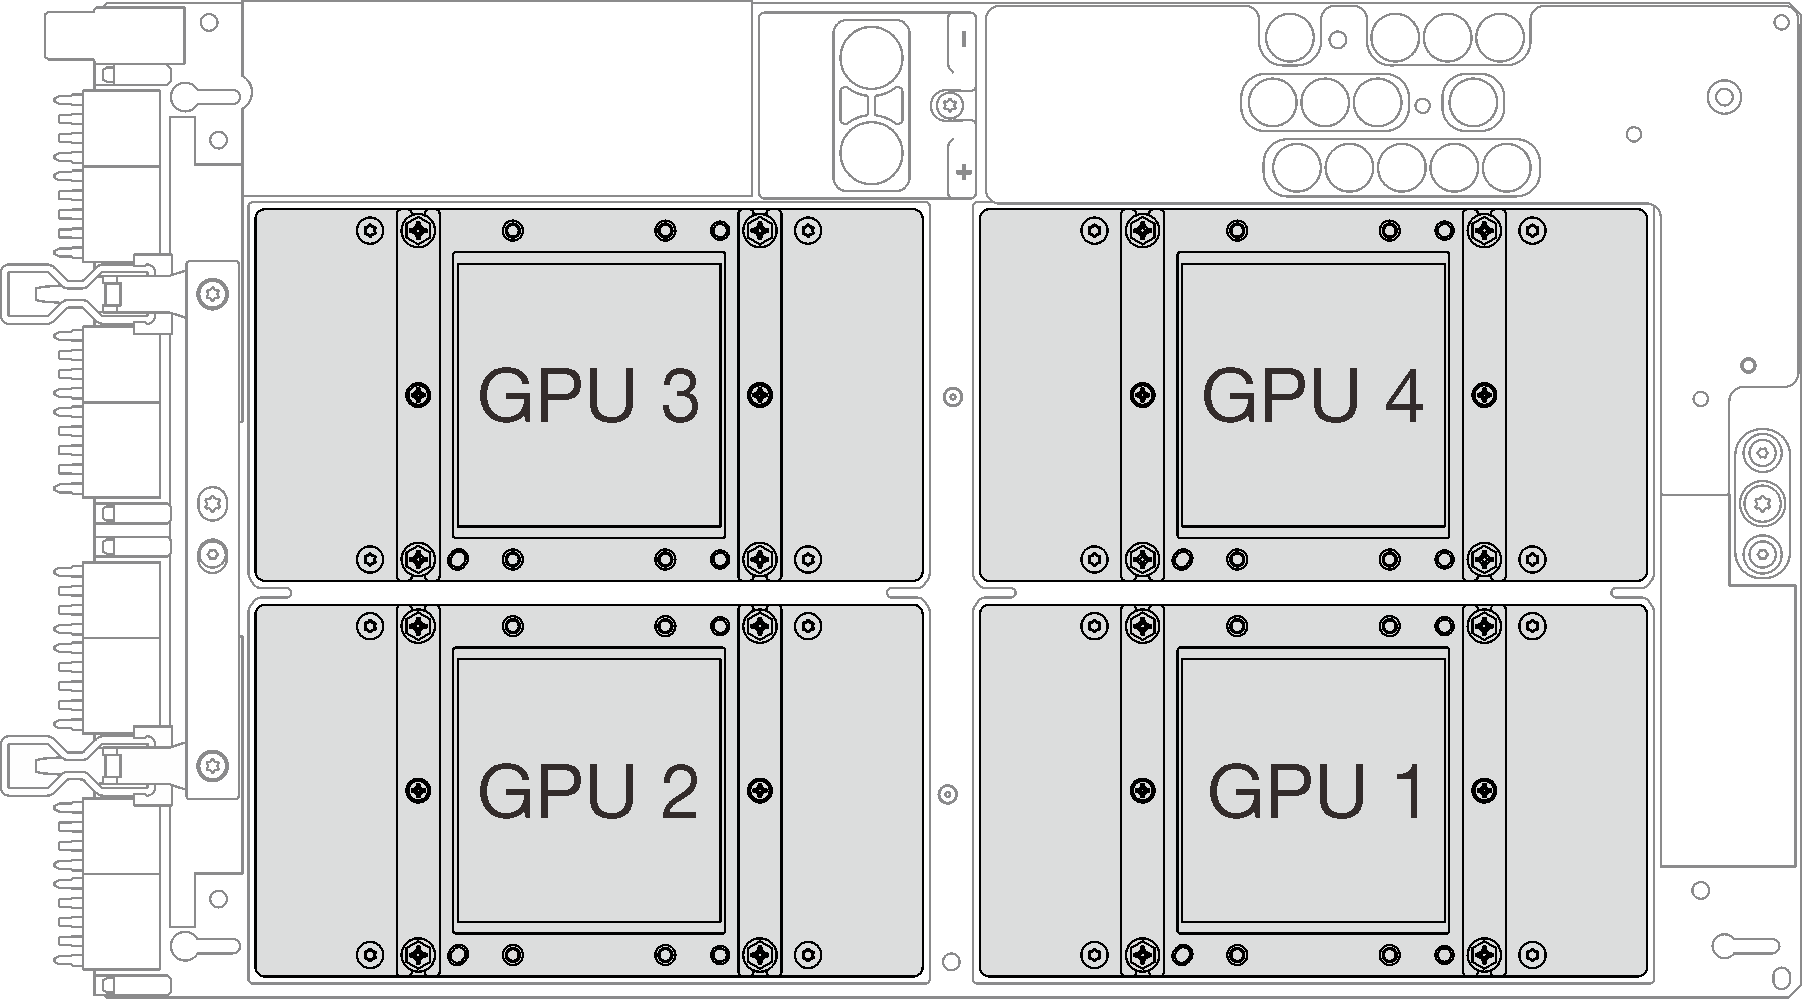 GPU connector and numbering